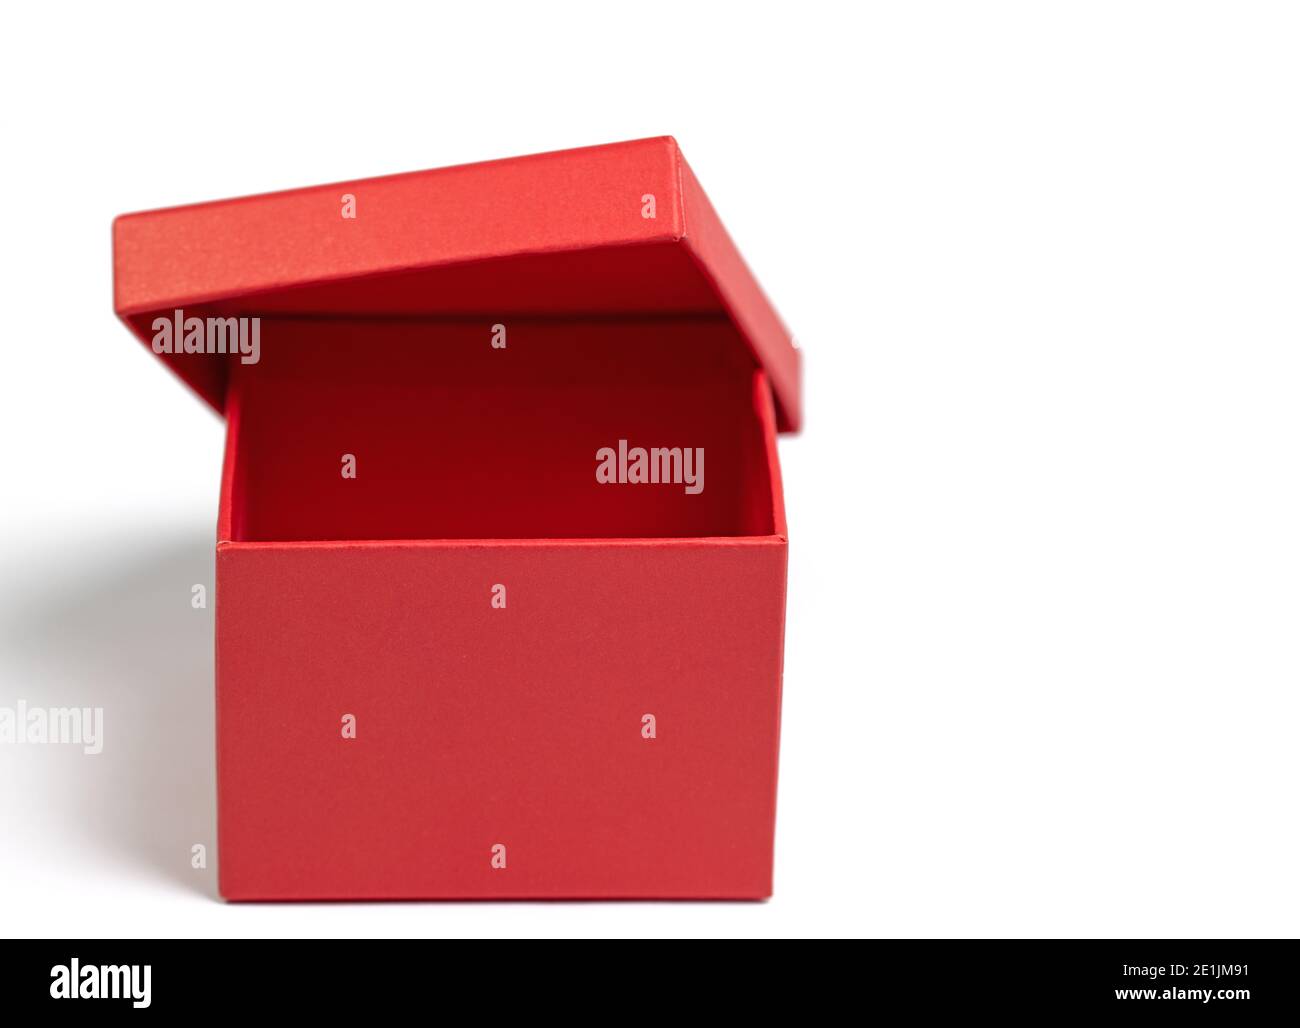 Empty red cardboard box against white background Stock Photo